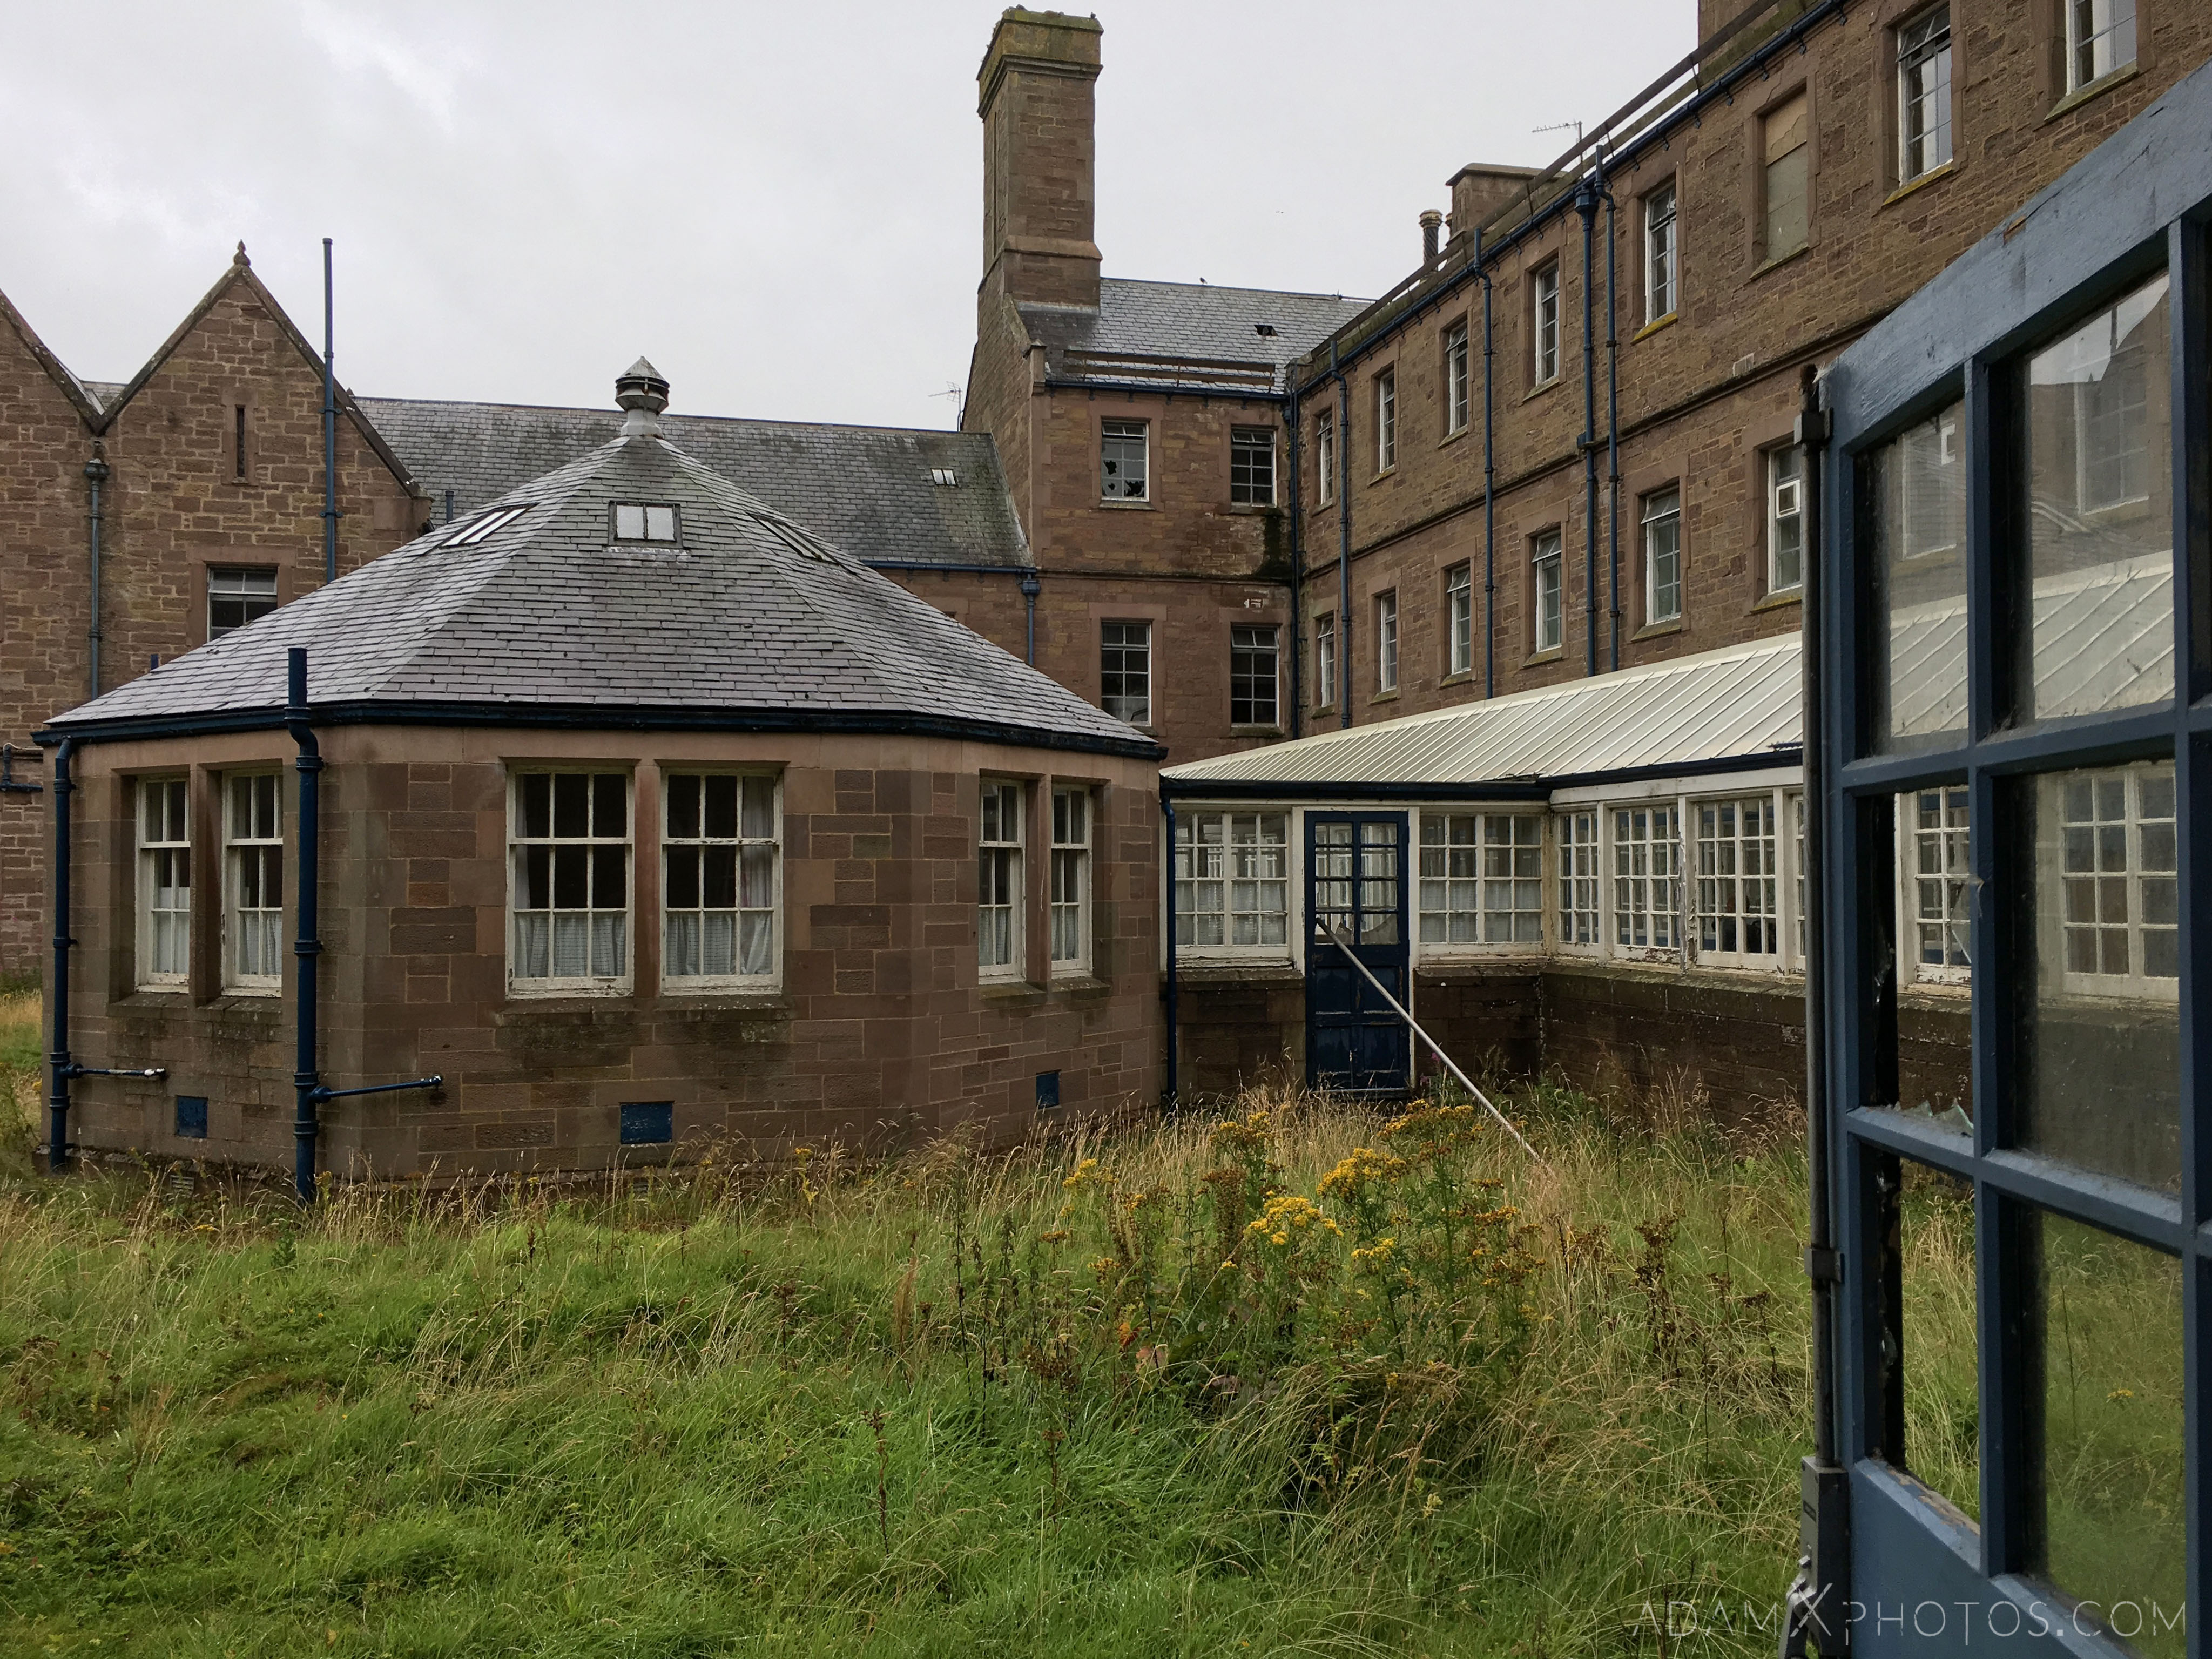 courtyard overgrown exterior outside Sunnyside Royal Hospital Montrose Scotland Adam X Urbex Urban Exploration Access 2018 Abandoned decay ruins lost forgotten derelict location creepy haunting eerie